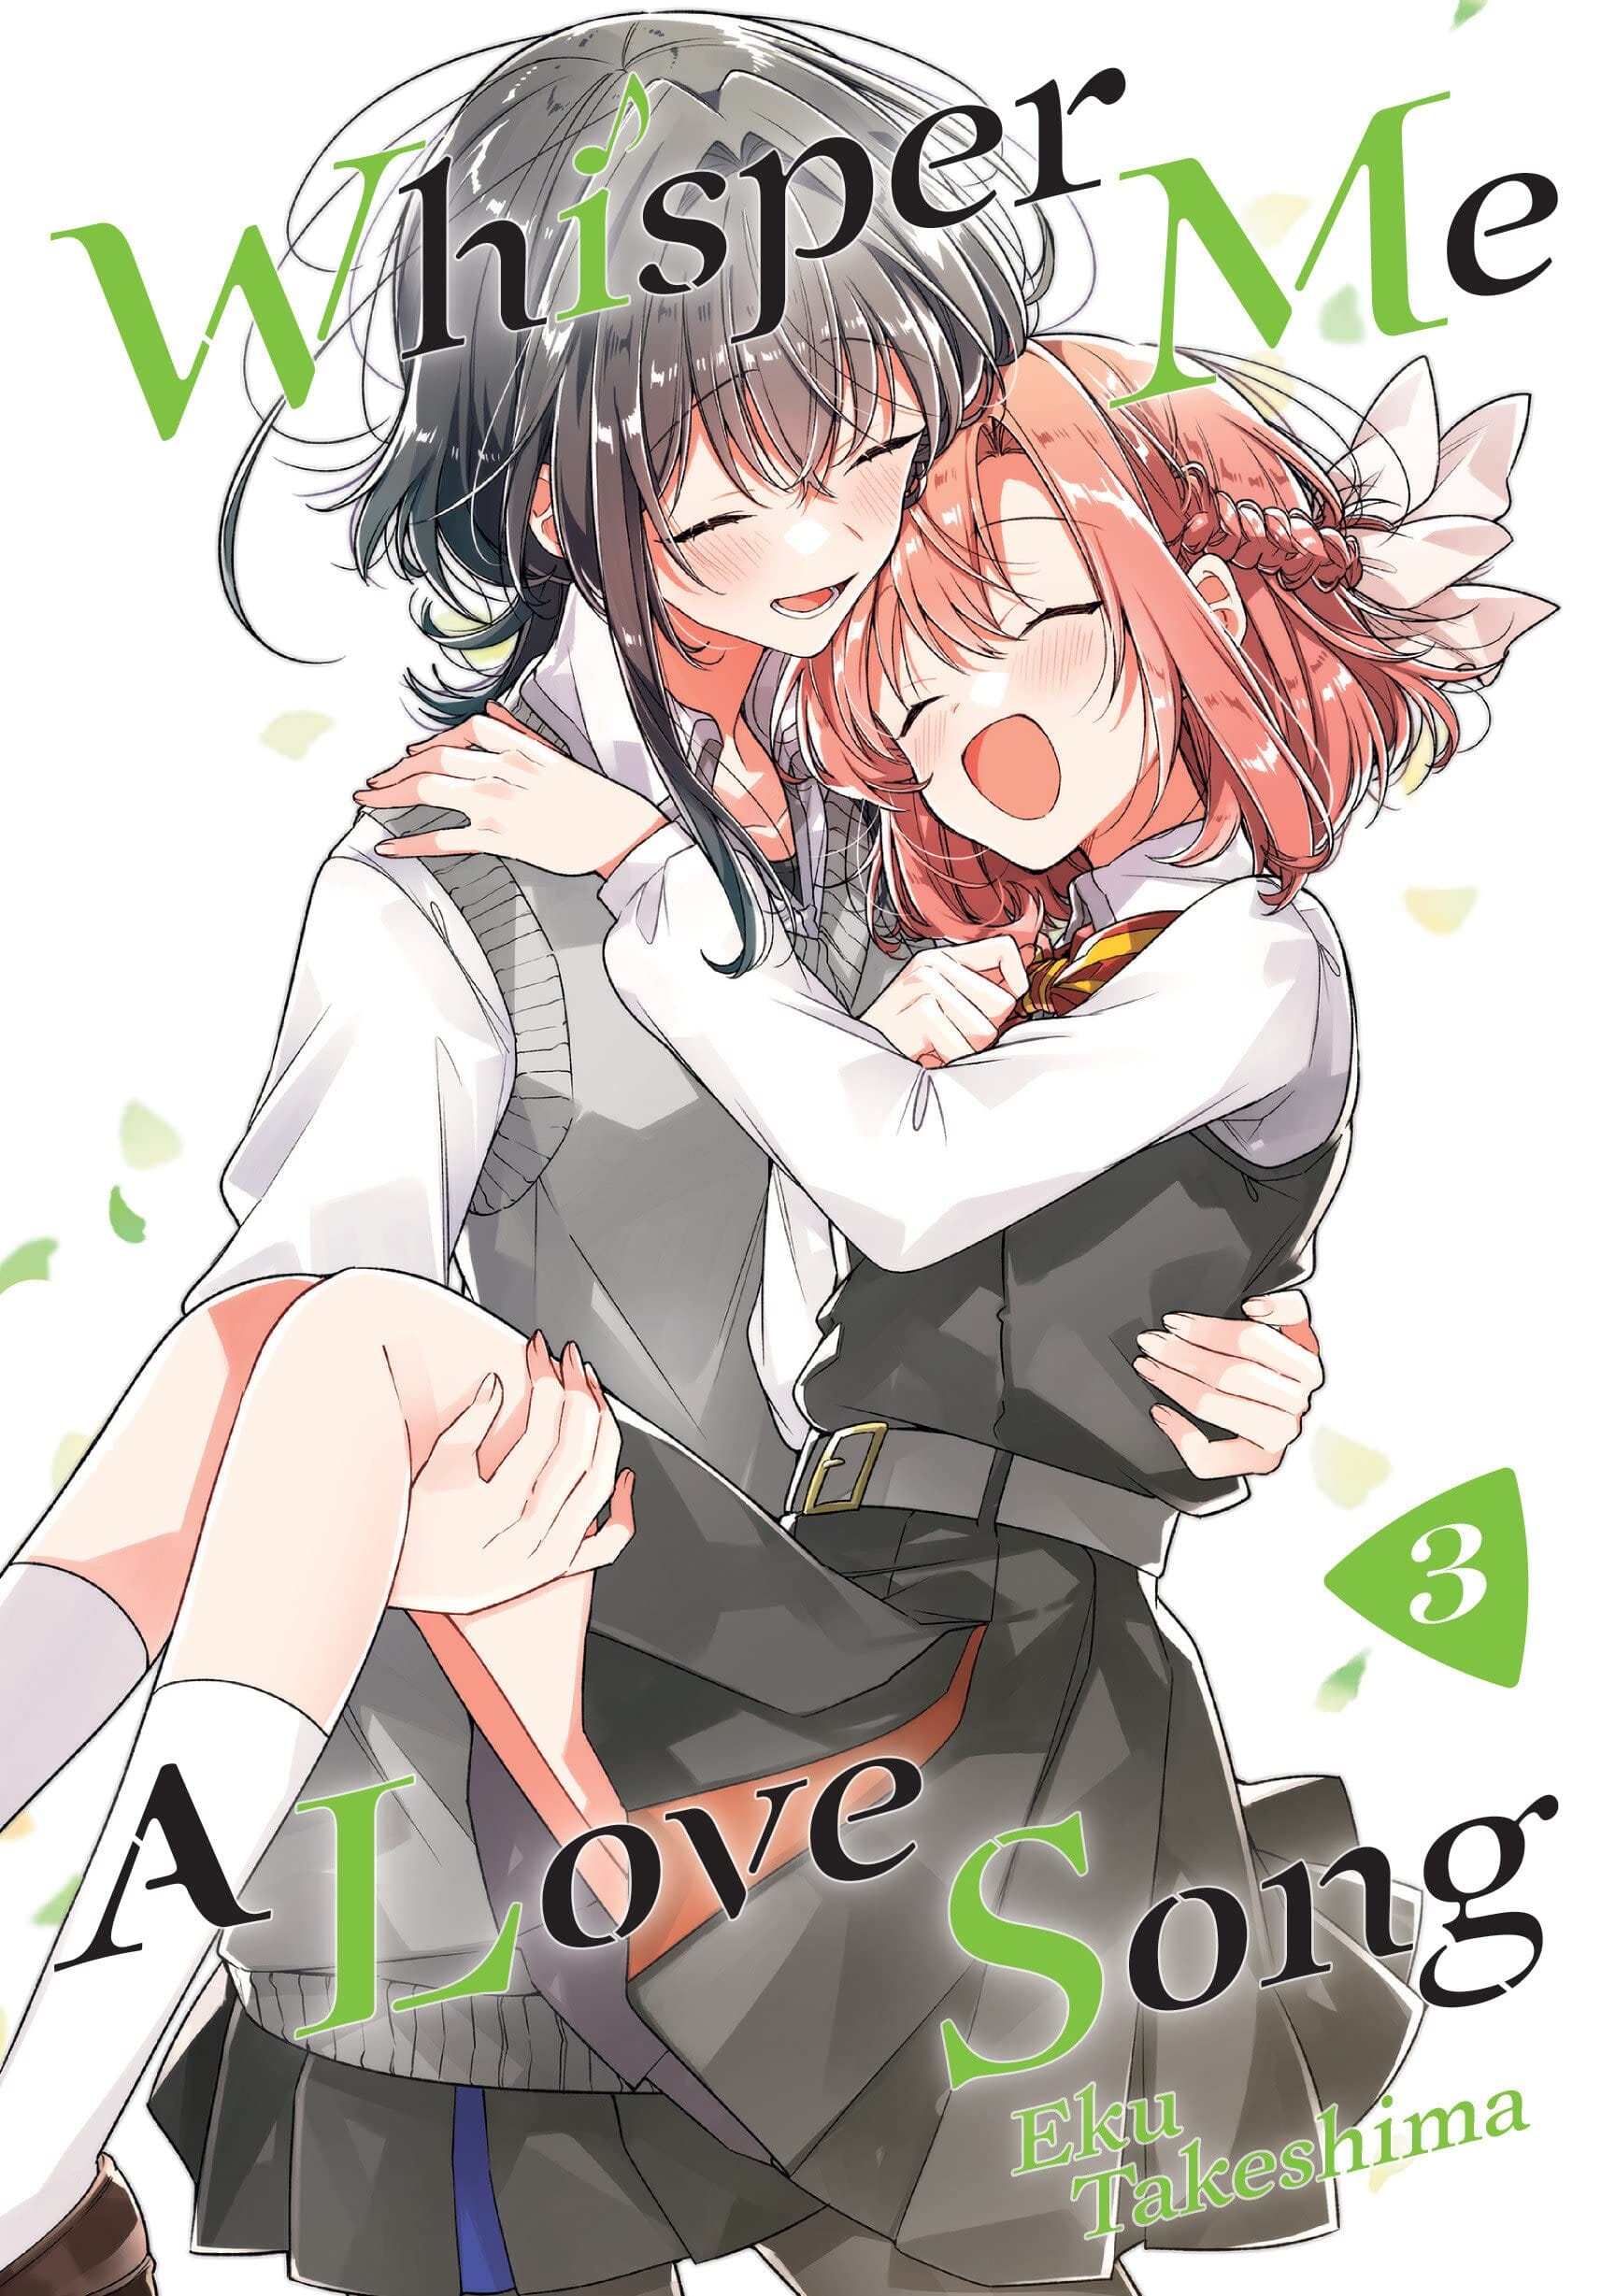 Whisper me a love song vol.3 | Multizone: Comics And Games